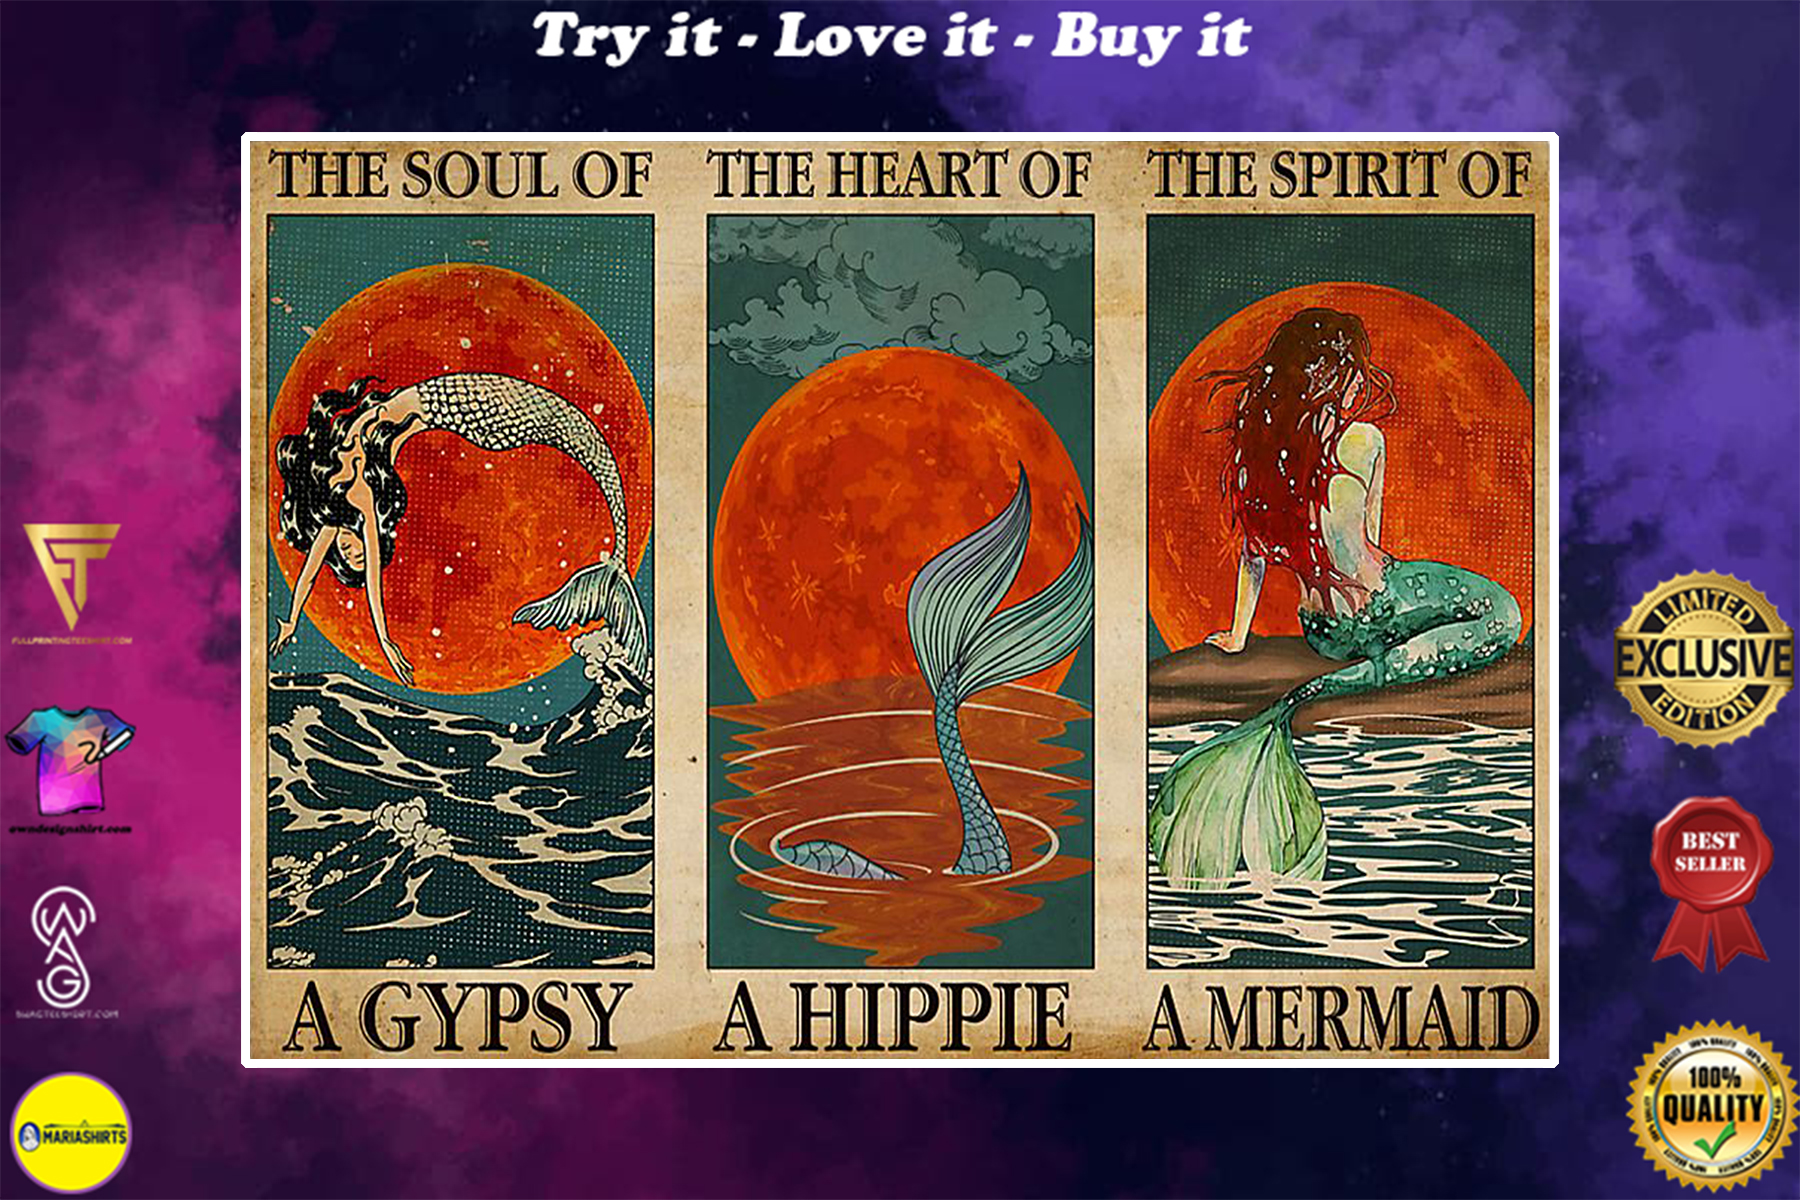 vintage the soul of a gypsy the heart of a hippie the spirit of a mermaid poster